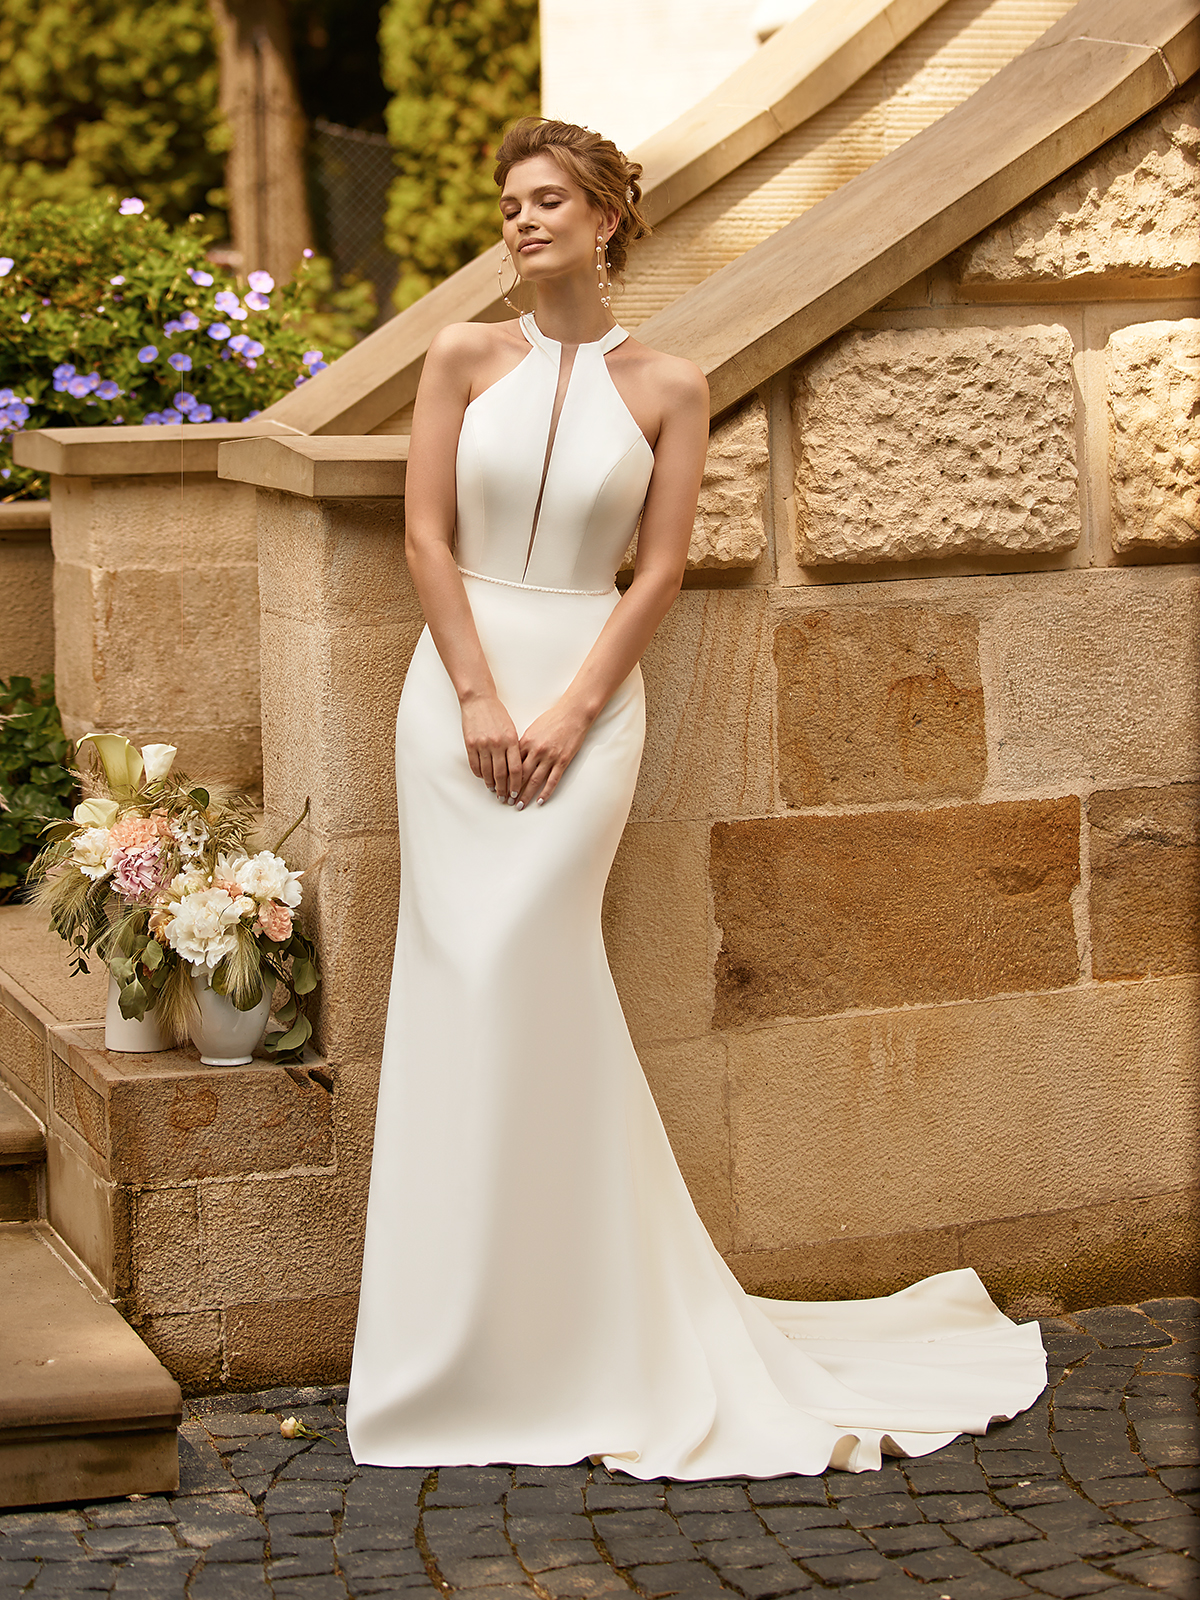 Tall bride in a crepe wedding gown with a halter neckline standing next to outdoor staircase with flower arrangements